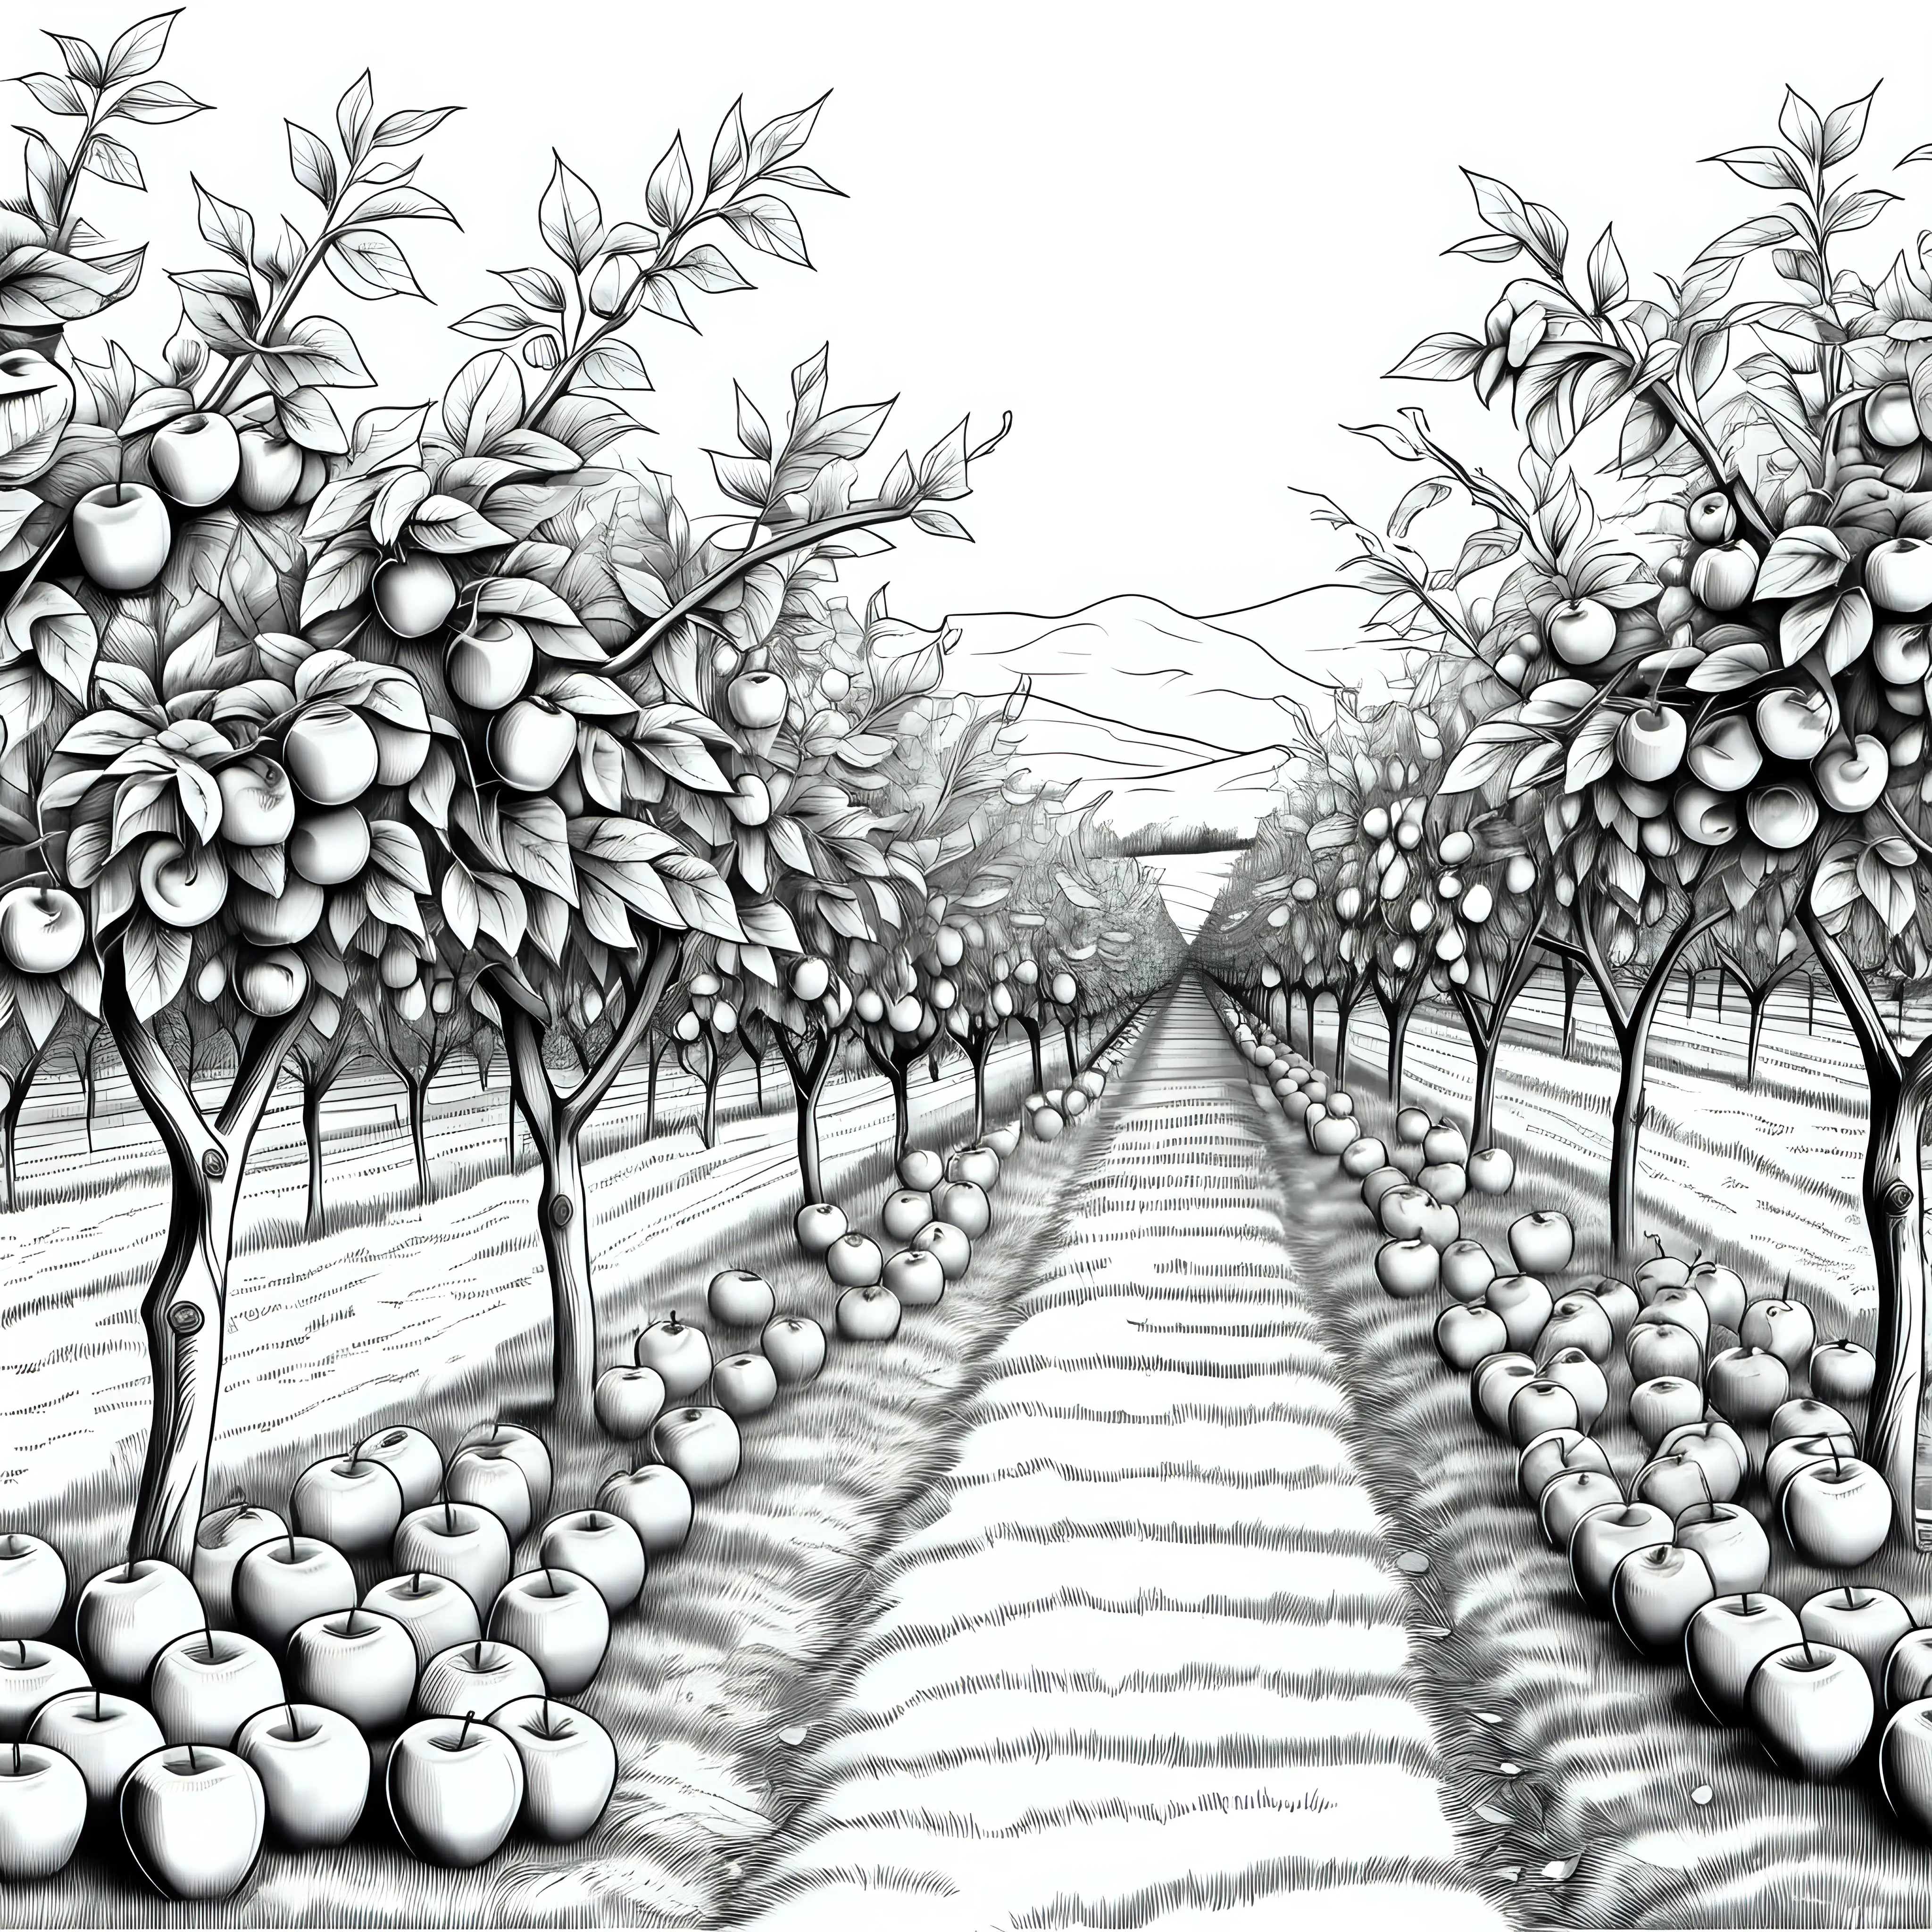 Vibrant Realistic Apple Orchard Coloring Page for Relaxation and Creativity